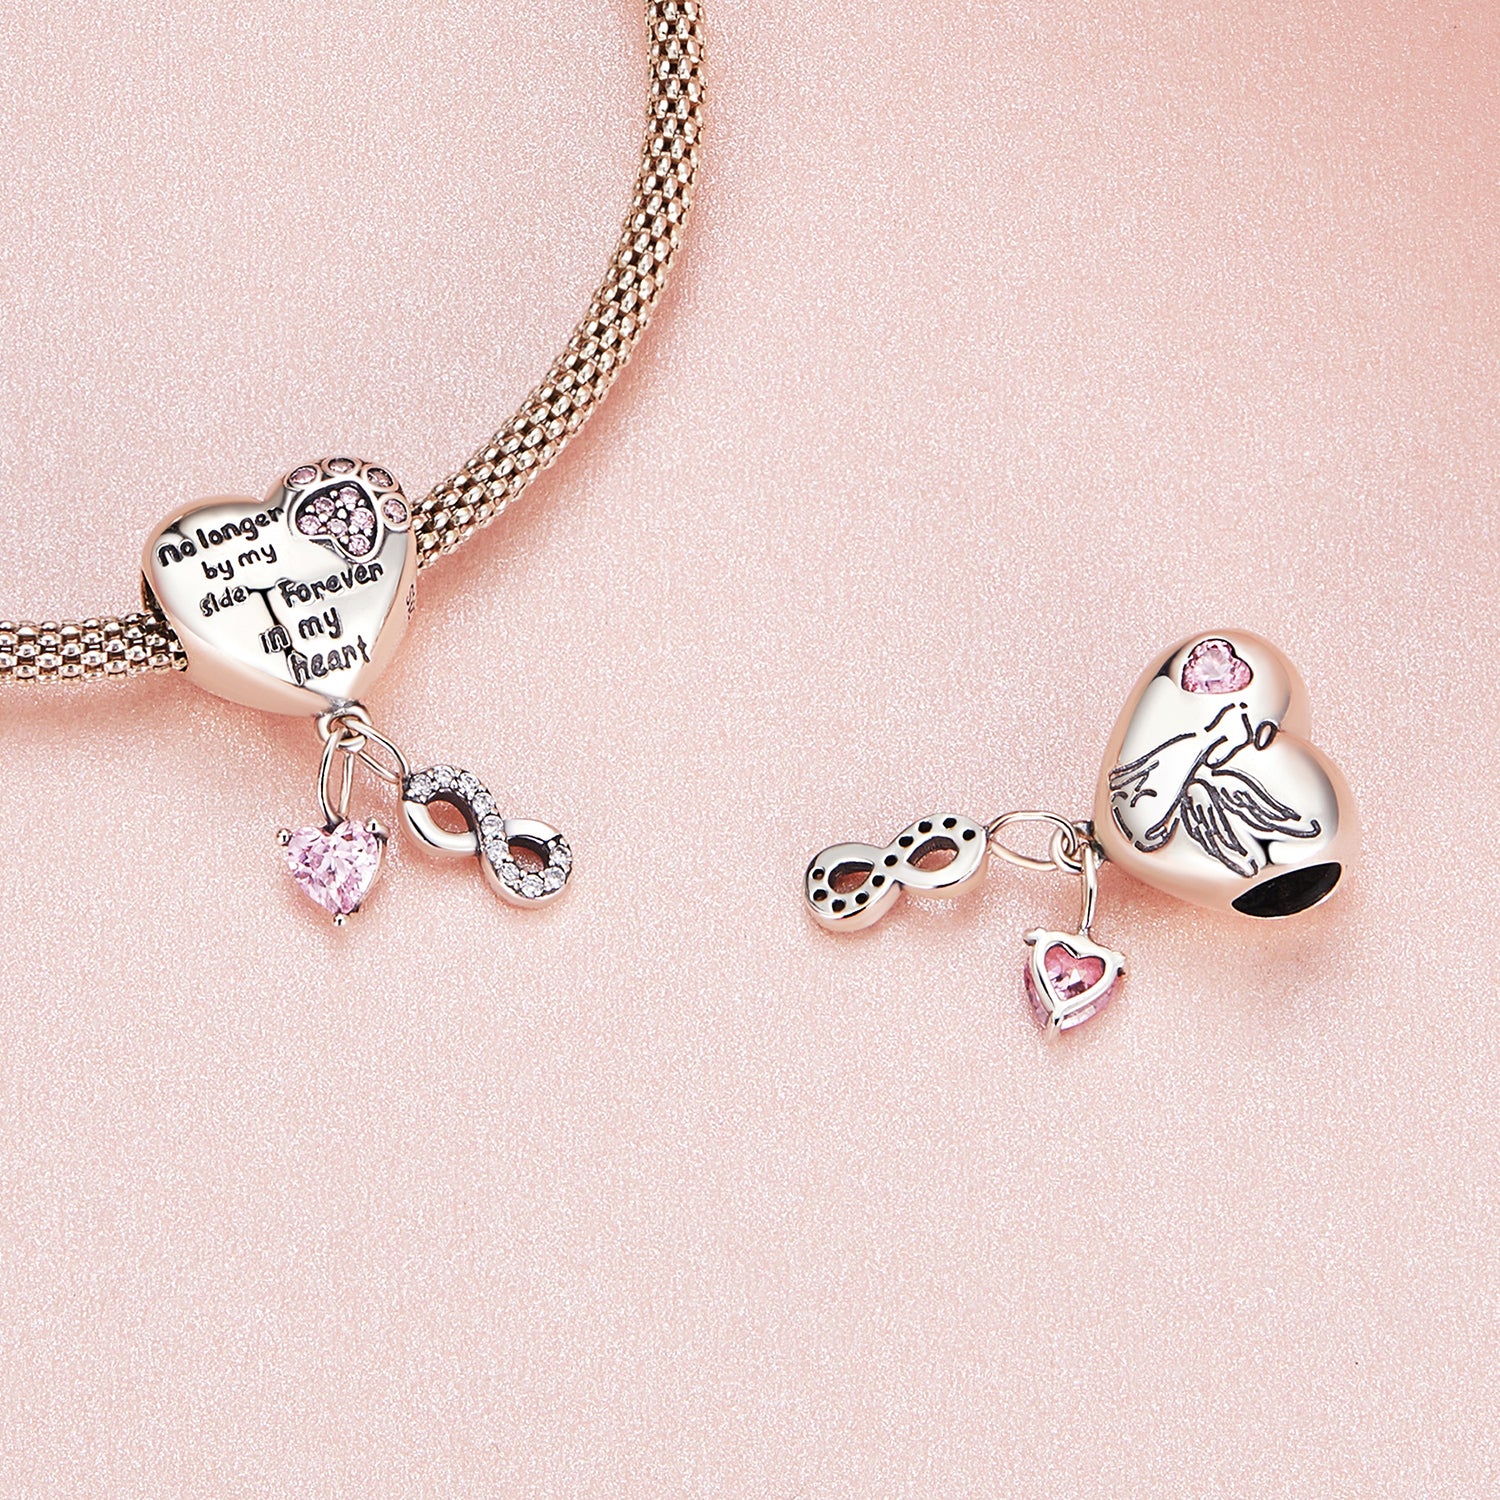 Paw Print Forever in Heart Charm